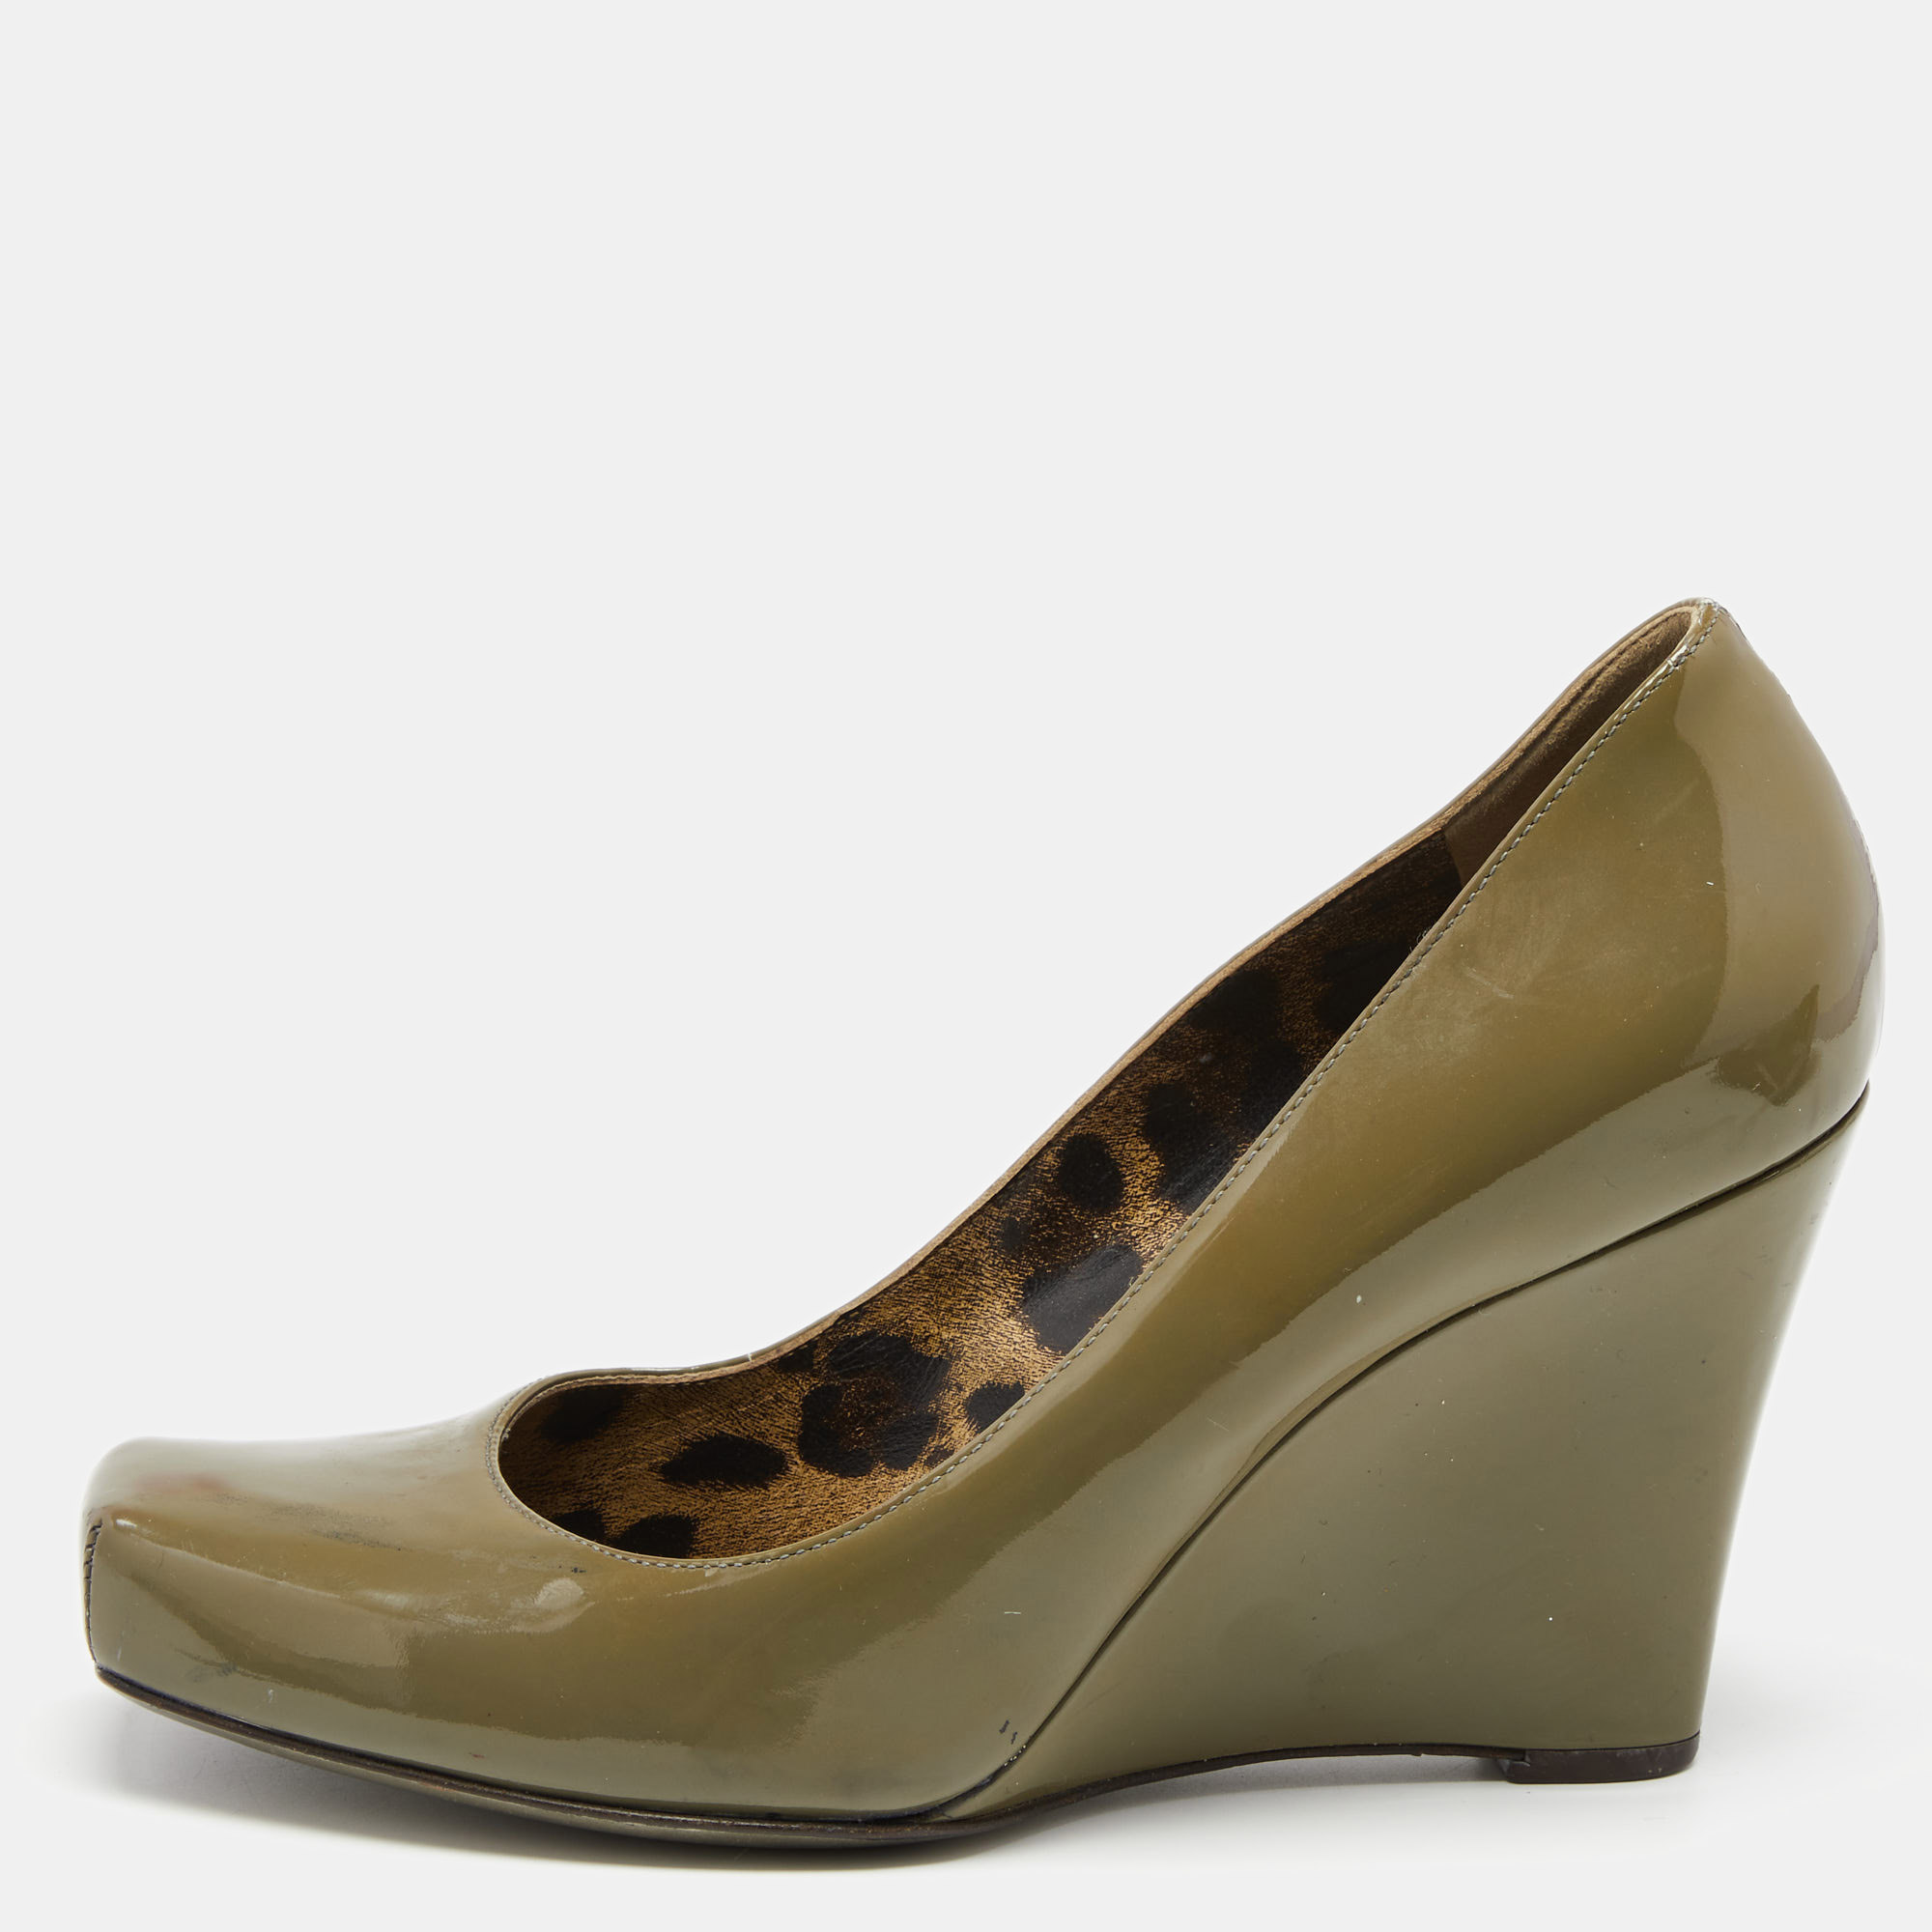 

Dolce & Gabbana Olive Green Patent Leather Wedge Pumps Size